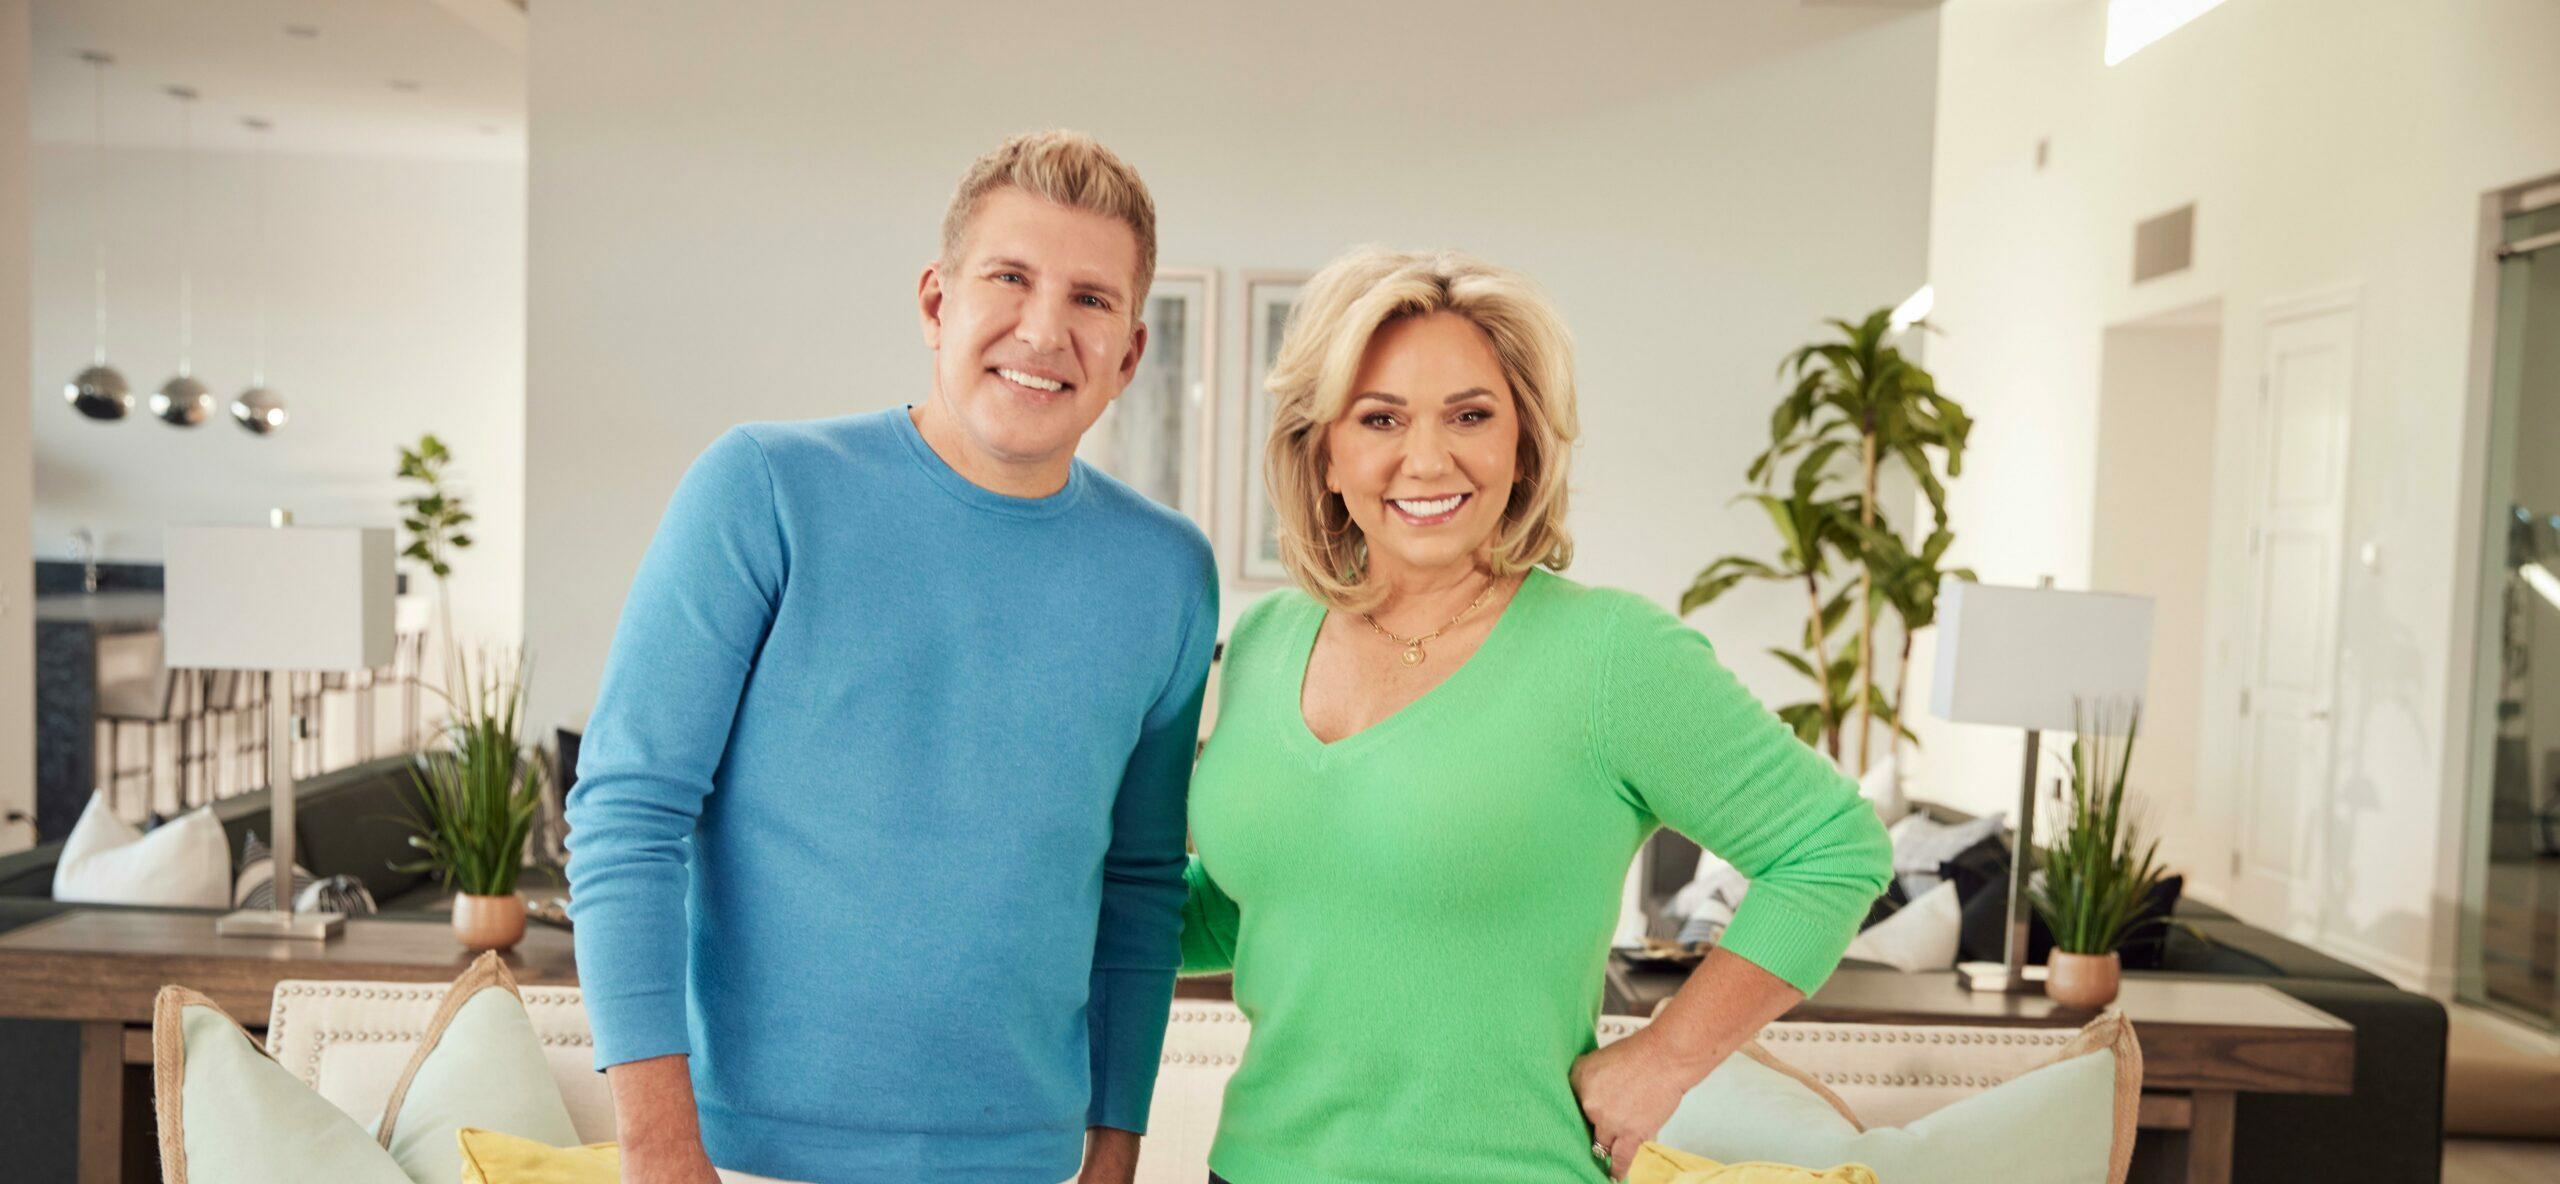 Todd & Julie Chrisley sentenced for tax evasion and fraud